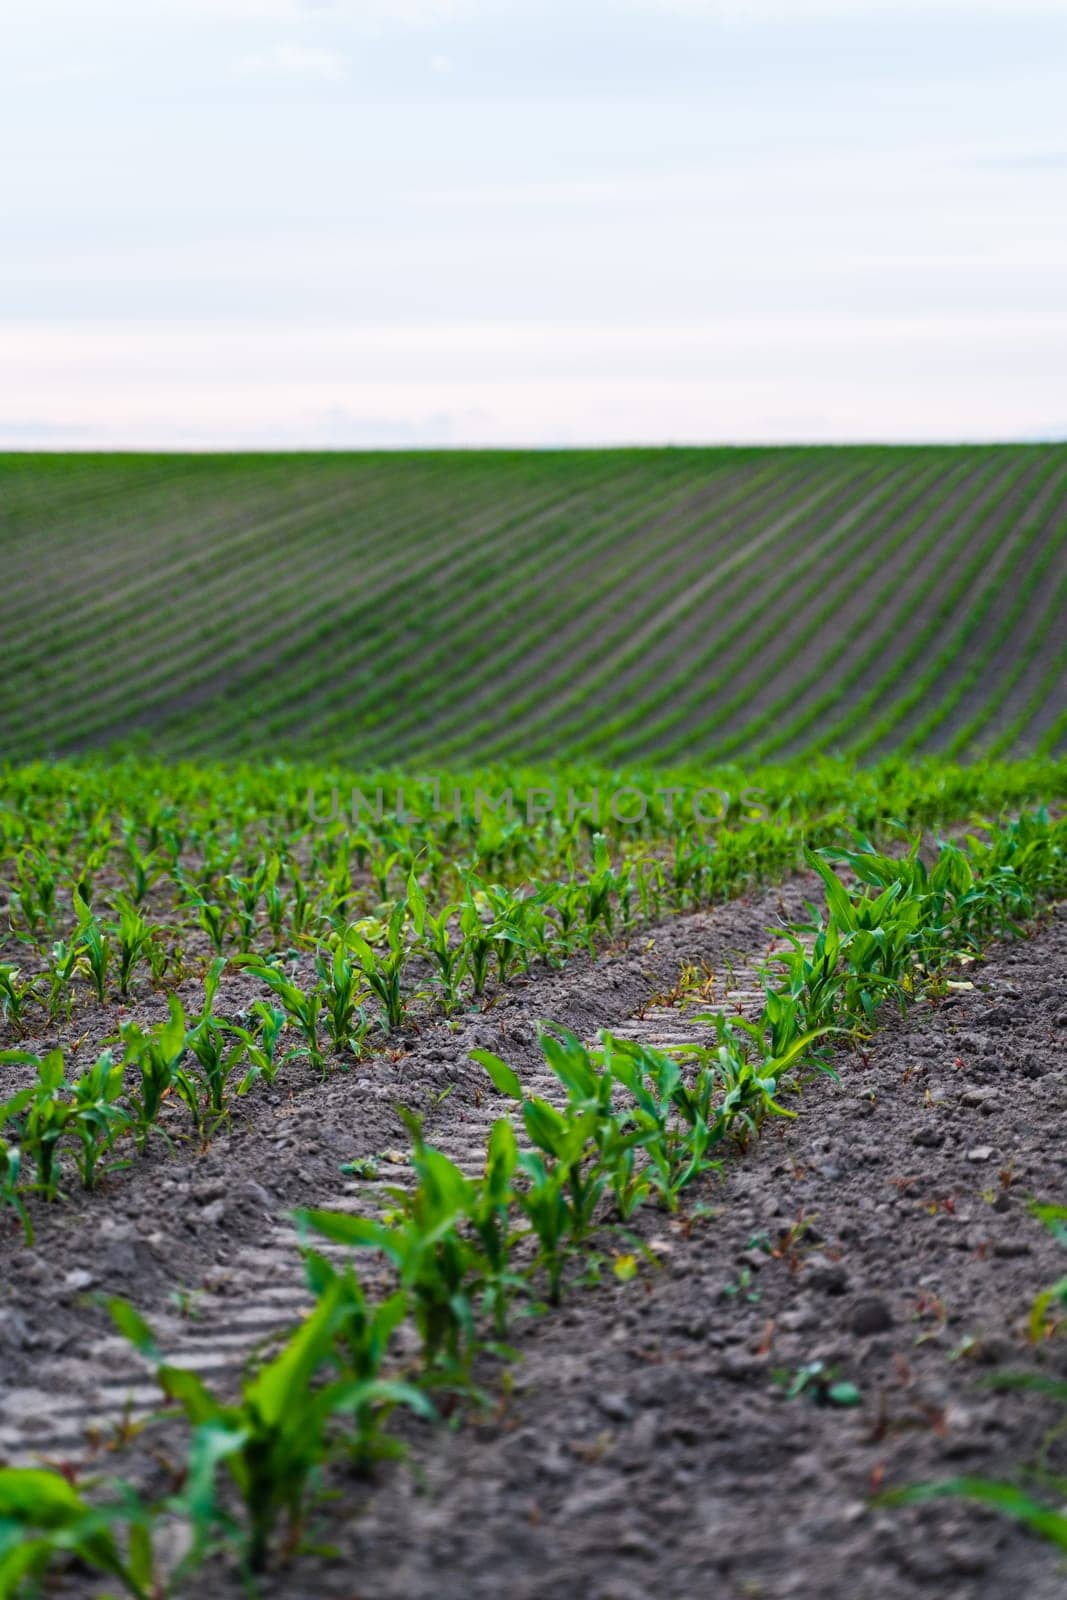 Rows of young green corn growing on the agriculture field. Growing young green corn seedling sprouts in cultivated agricultural farm field. by vovsht